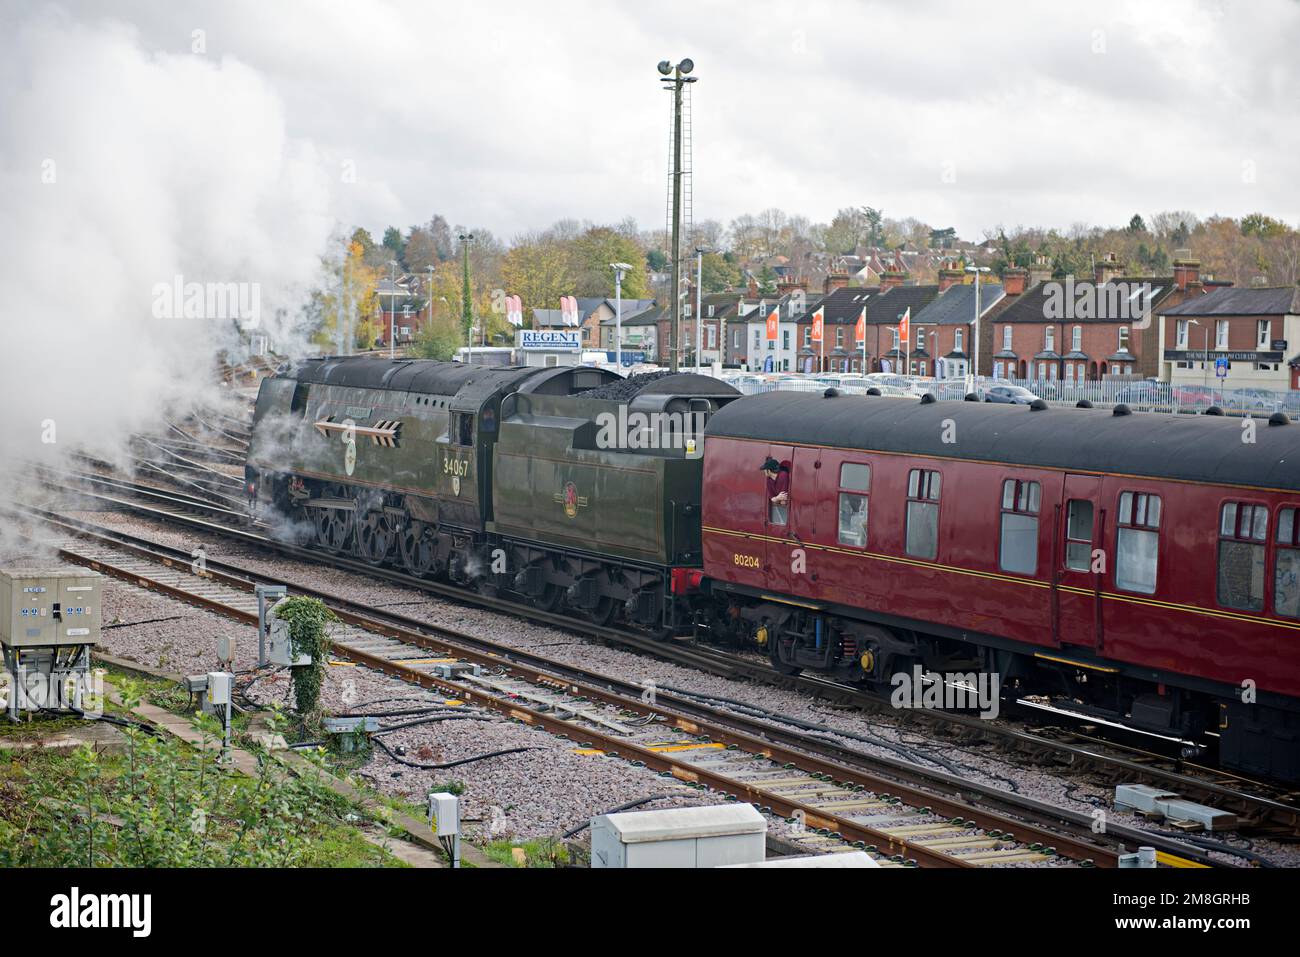 Preserved steam locomotive, Battle of Britain class no 34067 'Tangmere' leaves Tonbridge Station in Kent, UK with special charter train from London Stock Photo